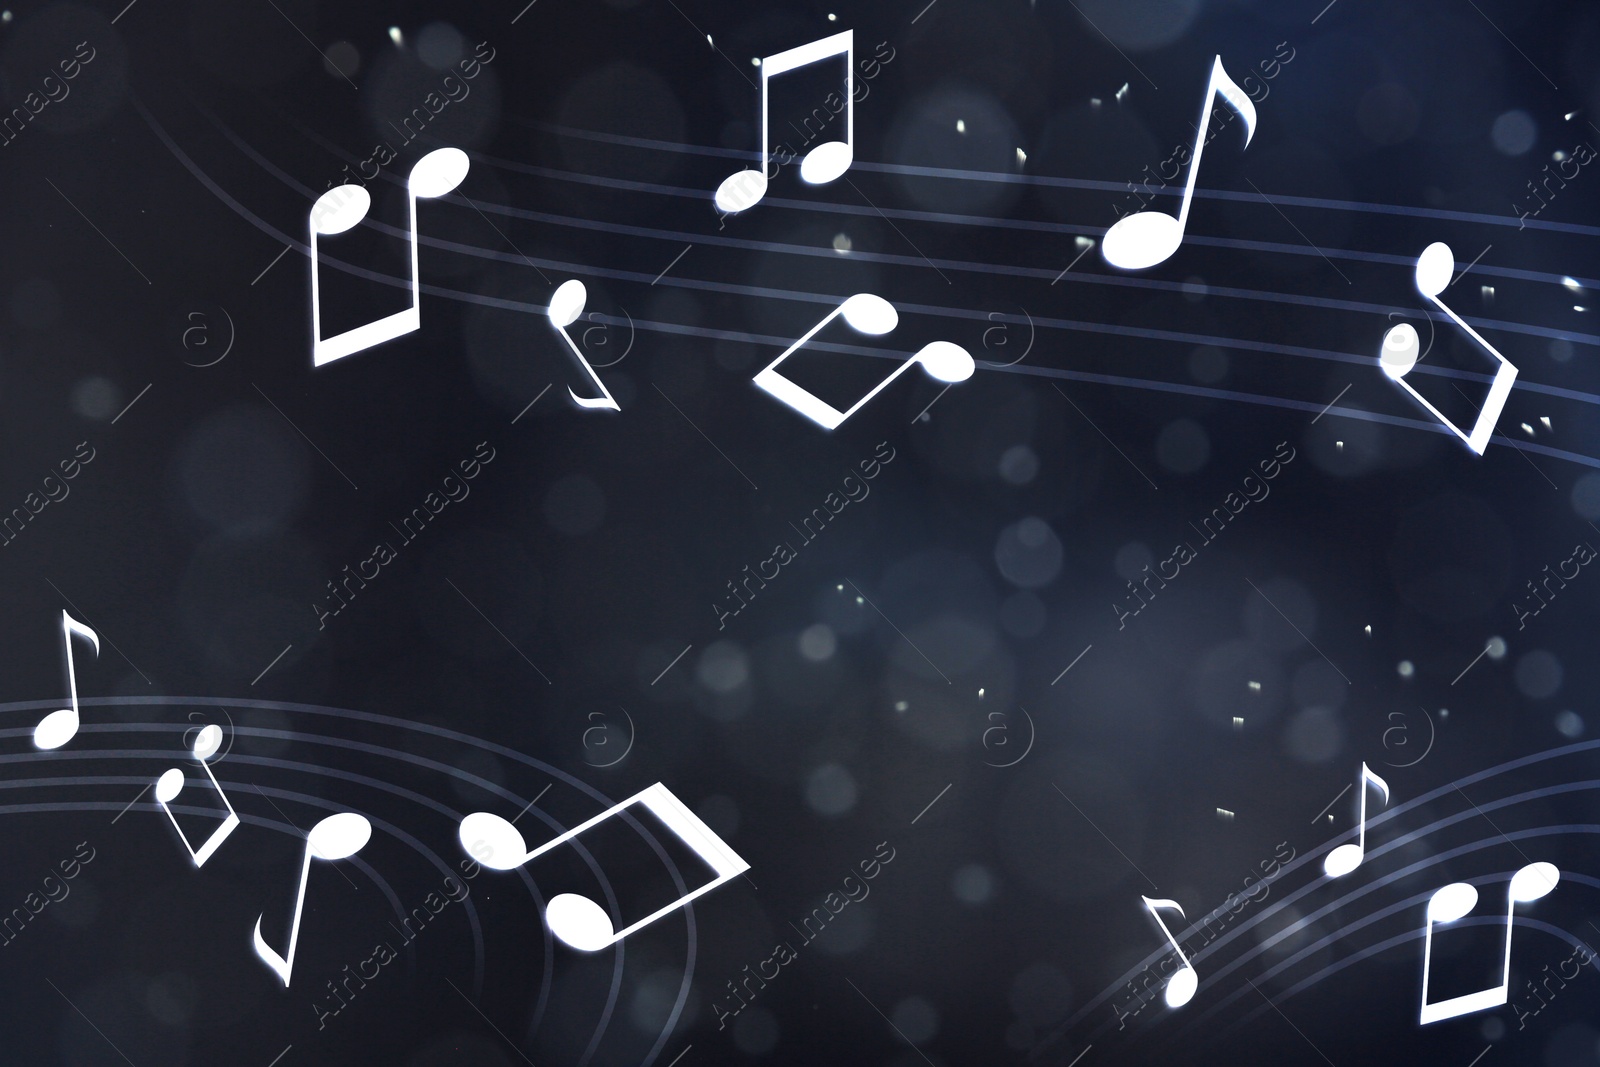 Image of Music notes flying on dark background, bokeh effect